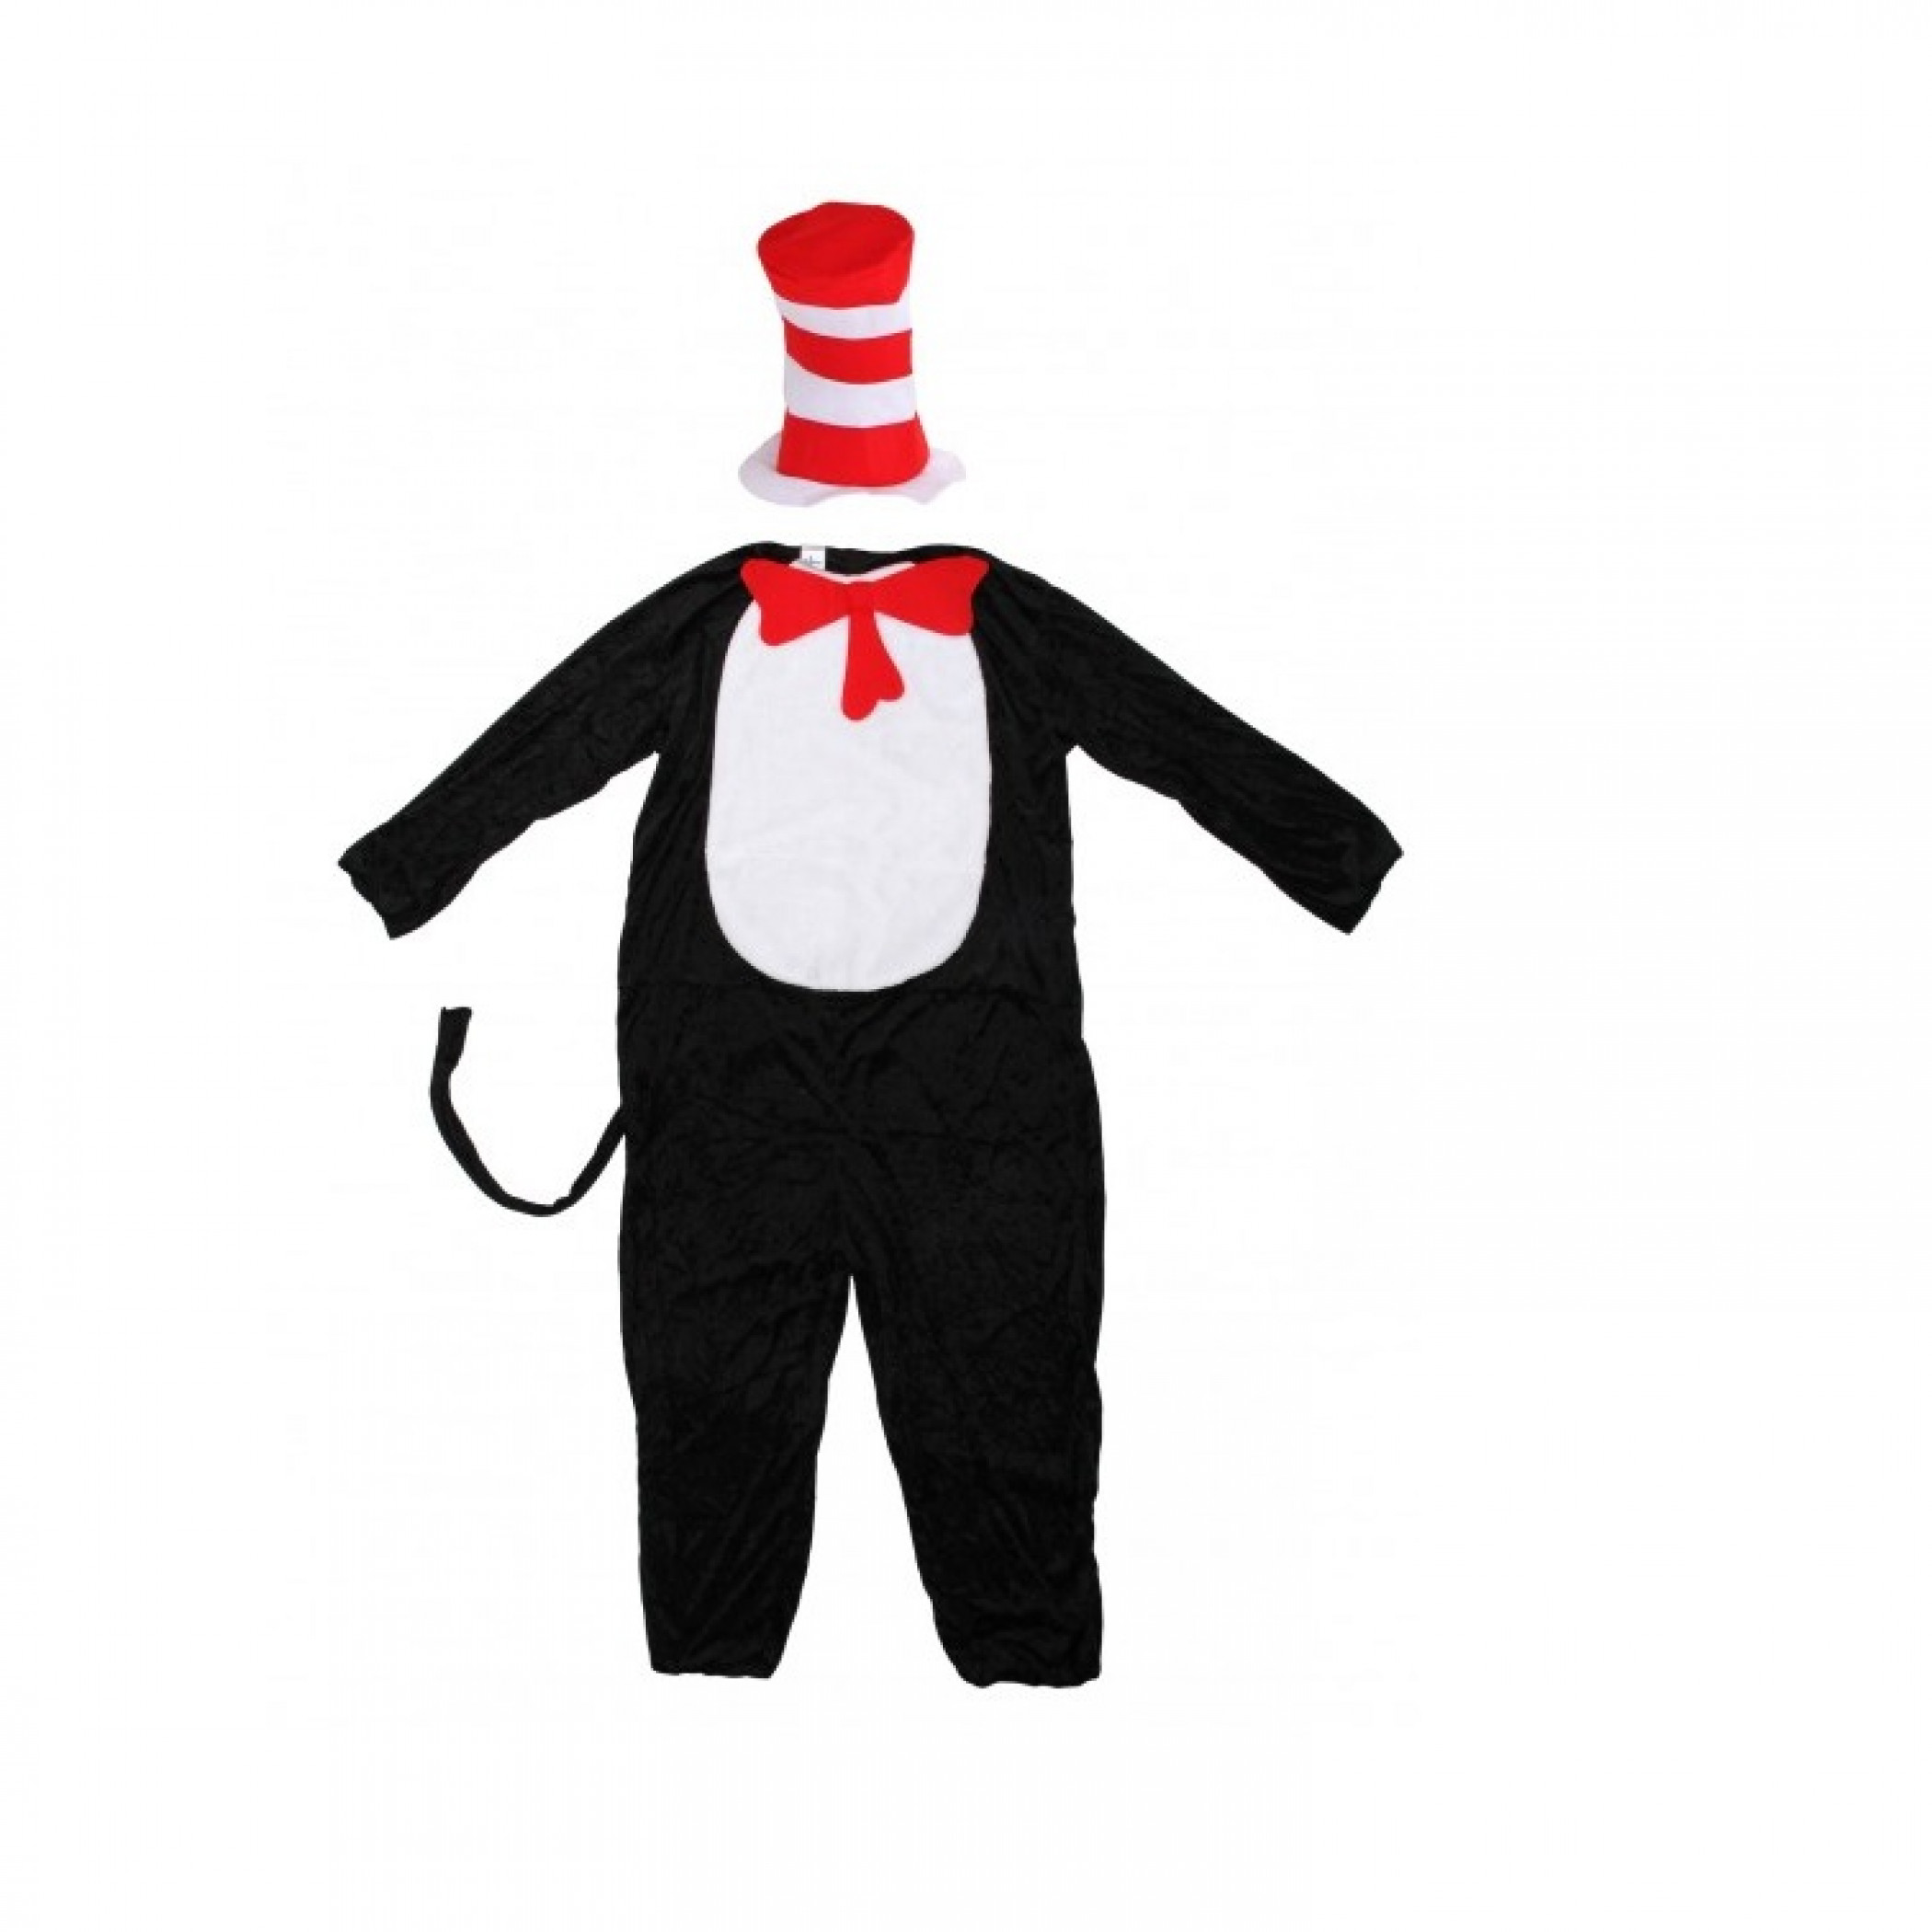 Dr. Seuss The Cat in the Hat Costume Men's